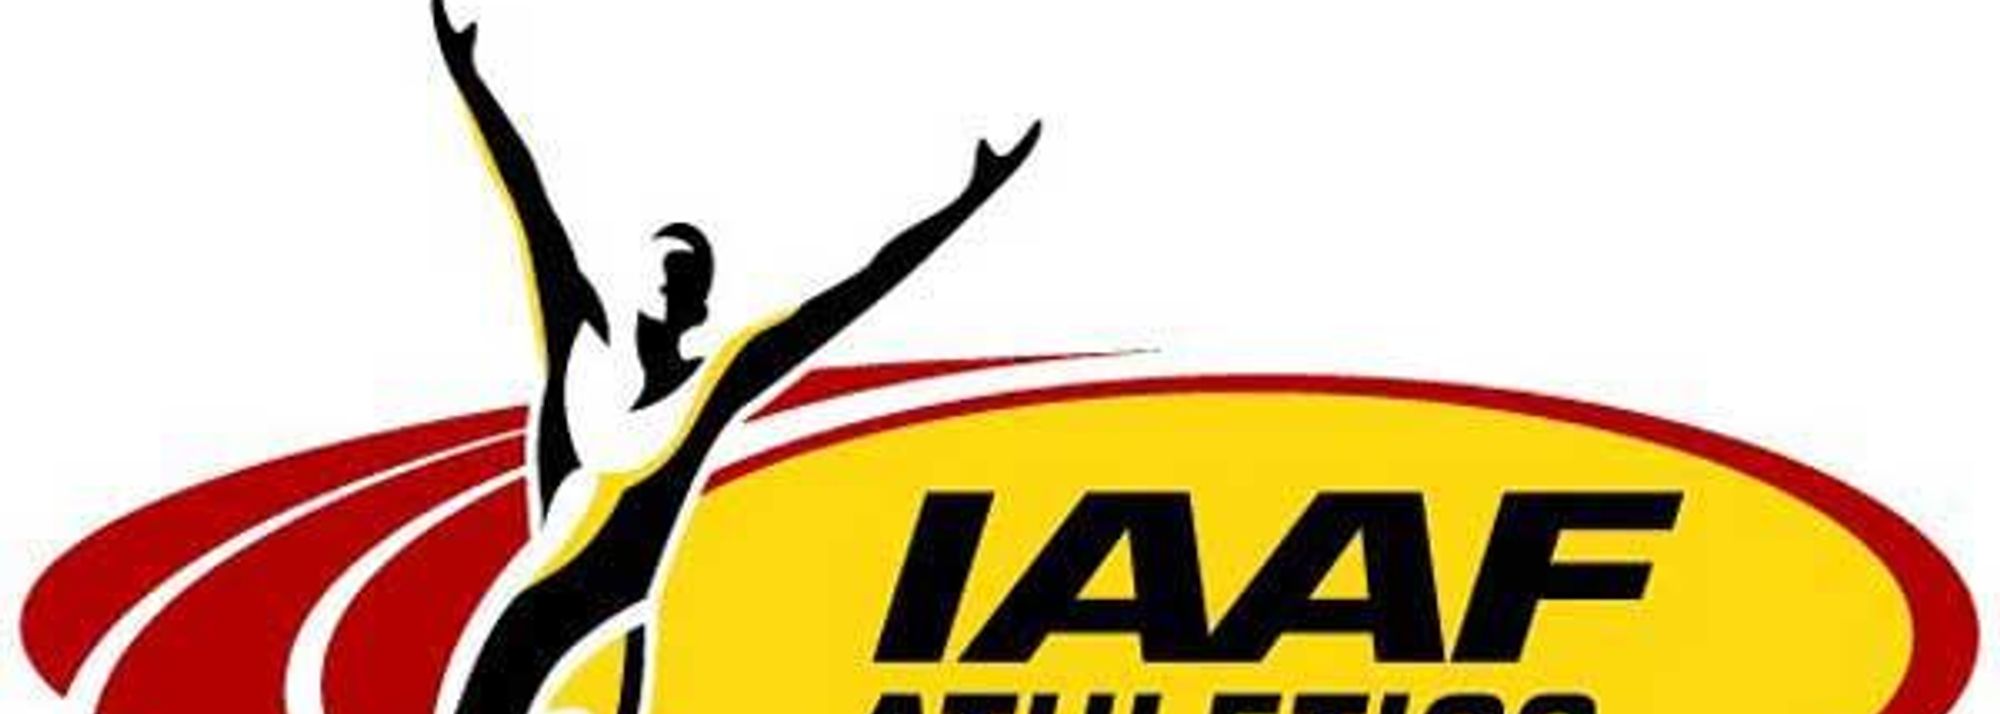 The IAAF is pleased to confirm that the 11th IAAF World Championships in Athletics, Osaka 2007, saw the implementation of the largest ever anti-doping programme at an athletics event.